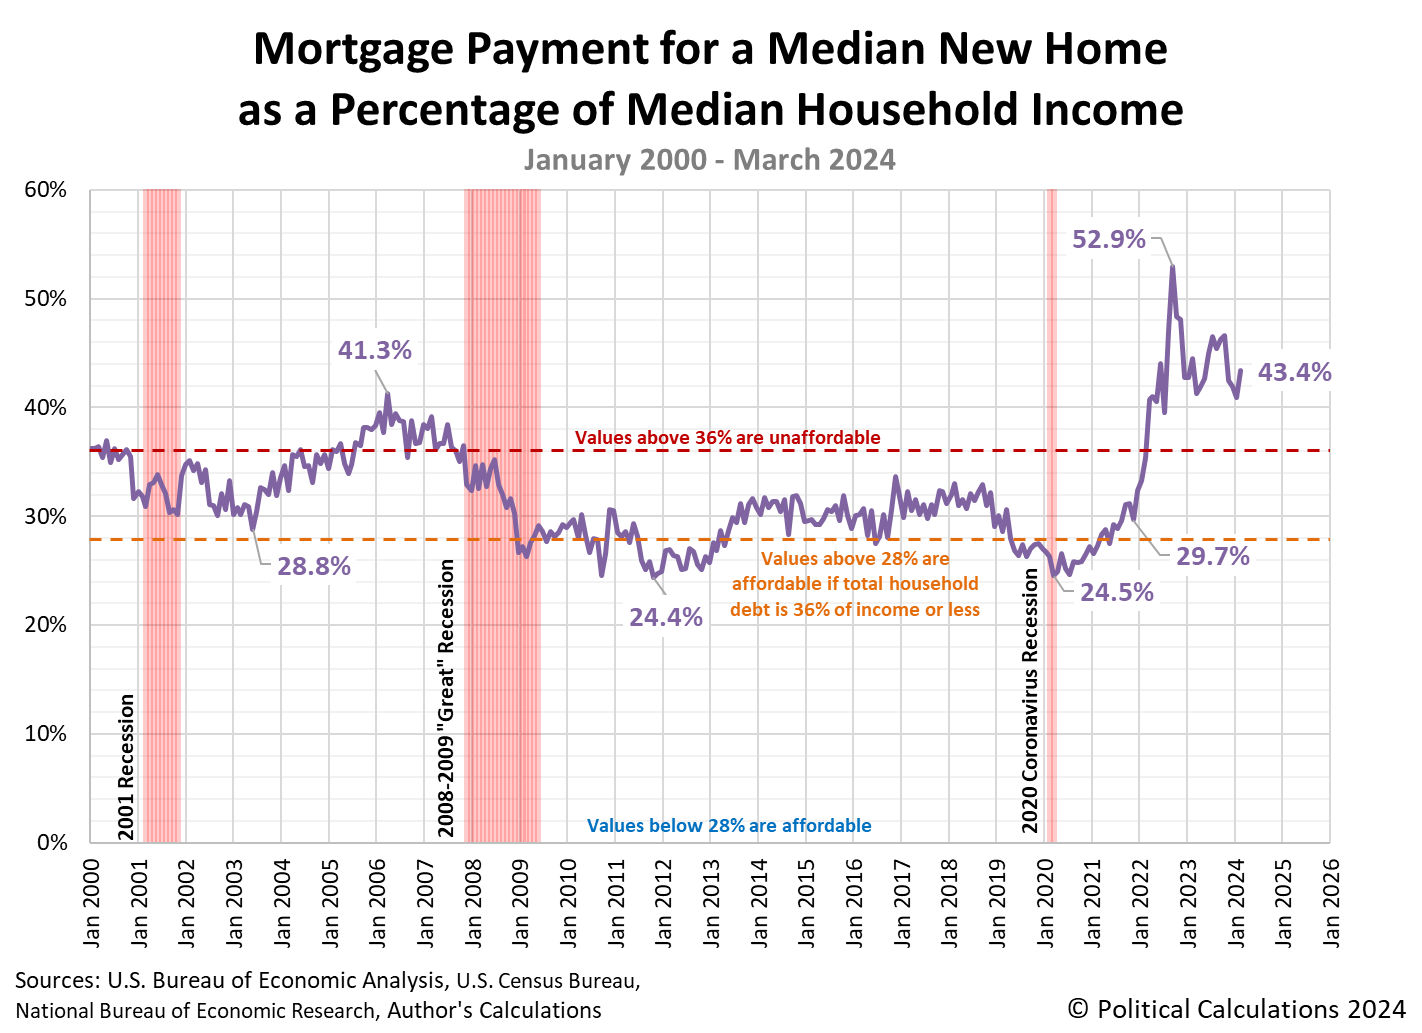 Mortgage Payment for a Median New Home as a Percentage of Median Household Income, January 2000 - March 2024